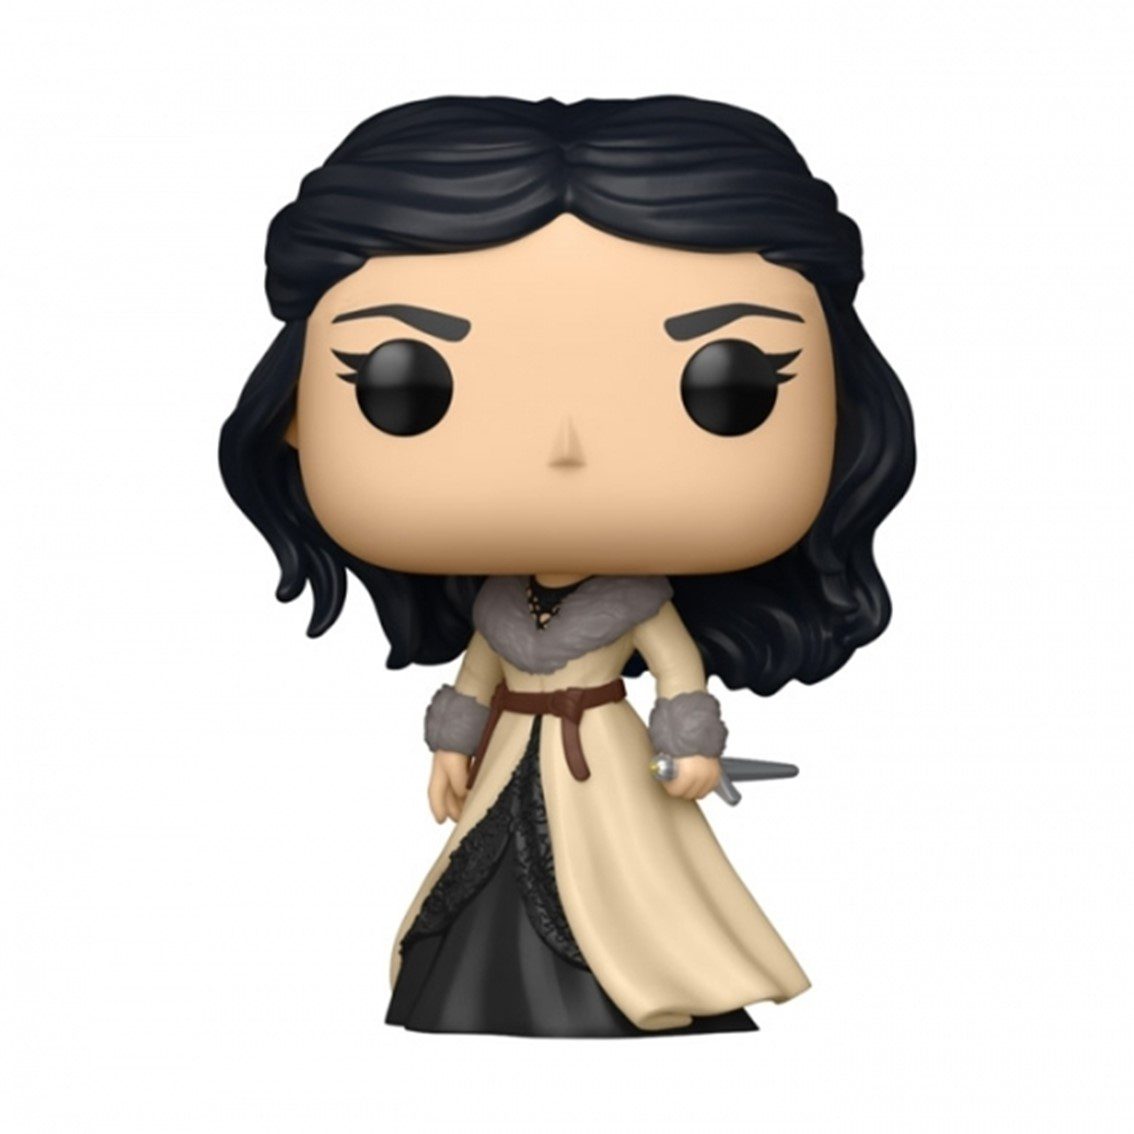 889698578158-PN-57815-Cod.-Articulo-MGS0000007561-Funko-pop-series-tv-the-witcher-yennefer-57815-1